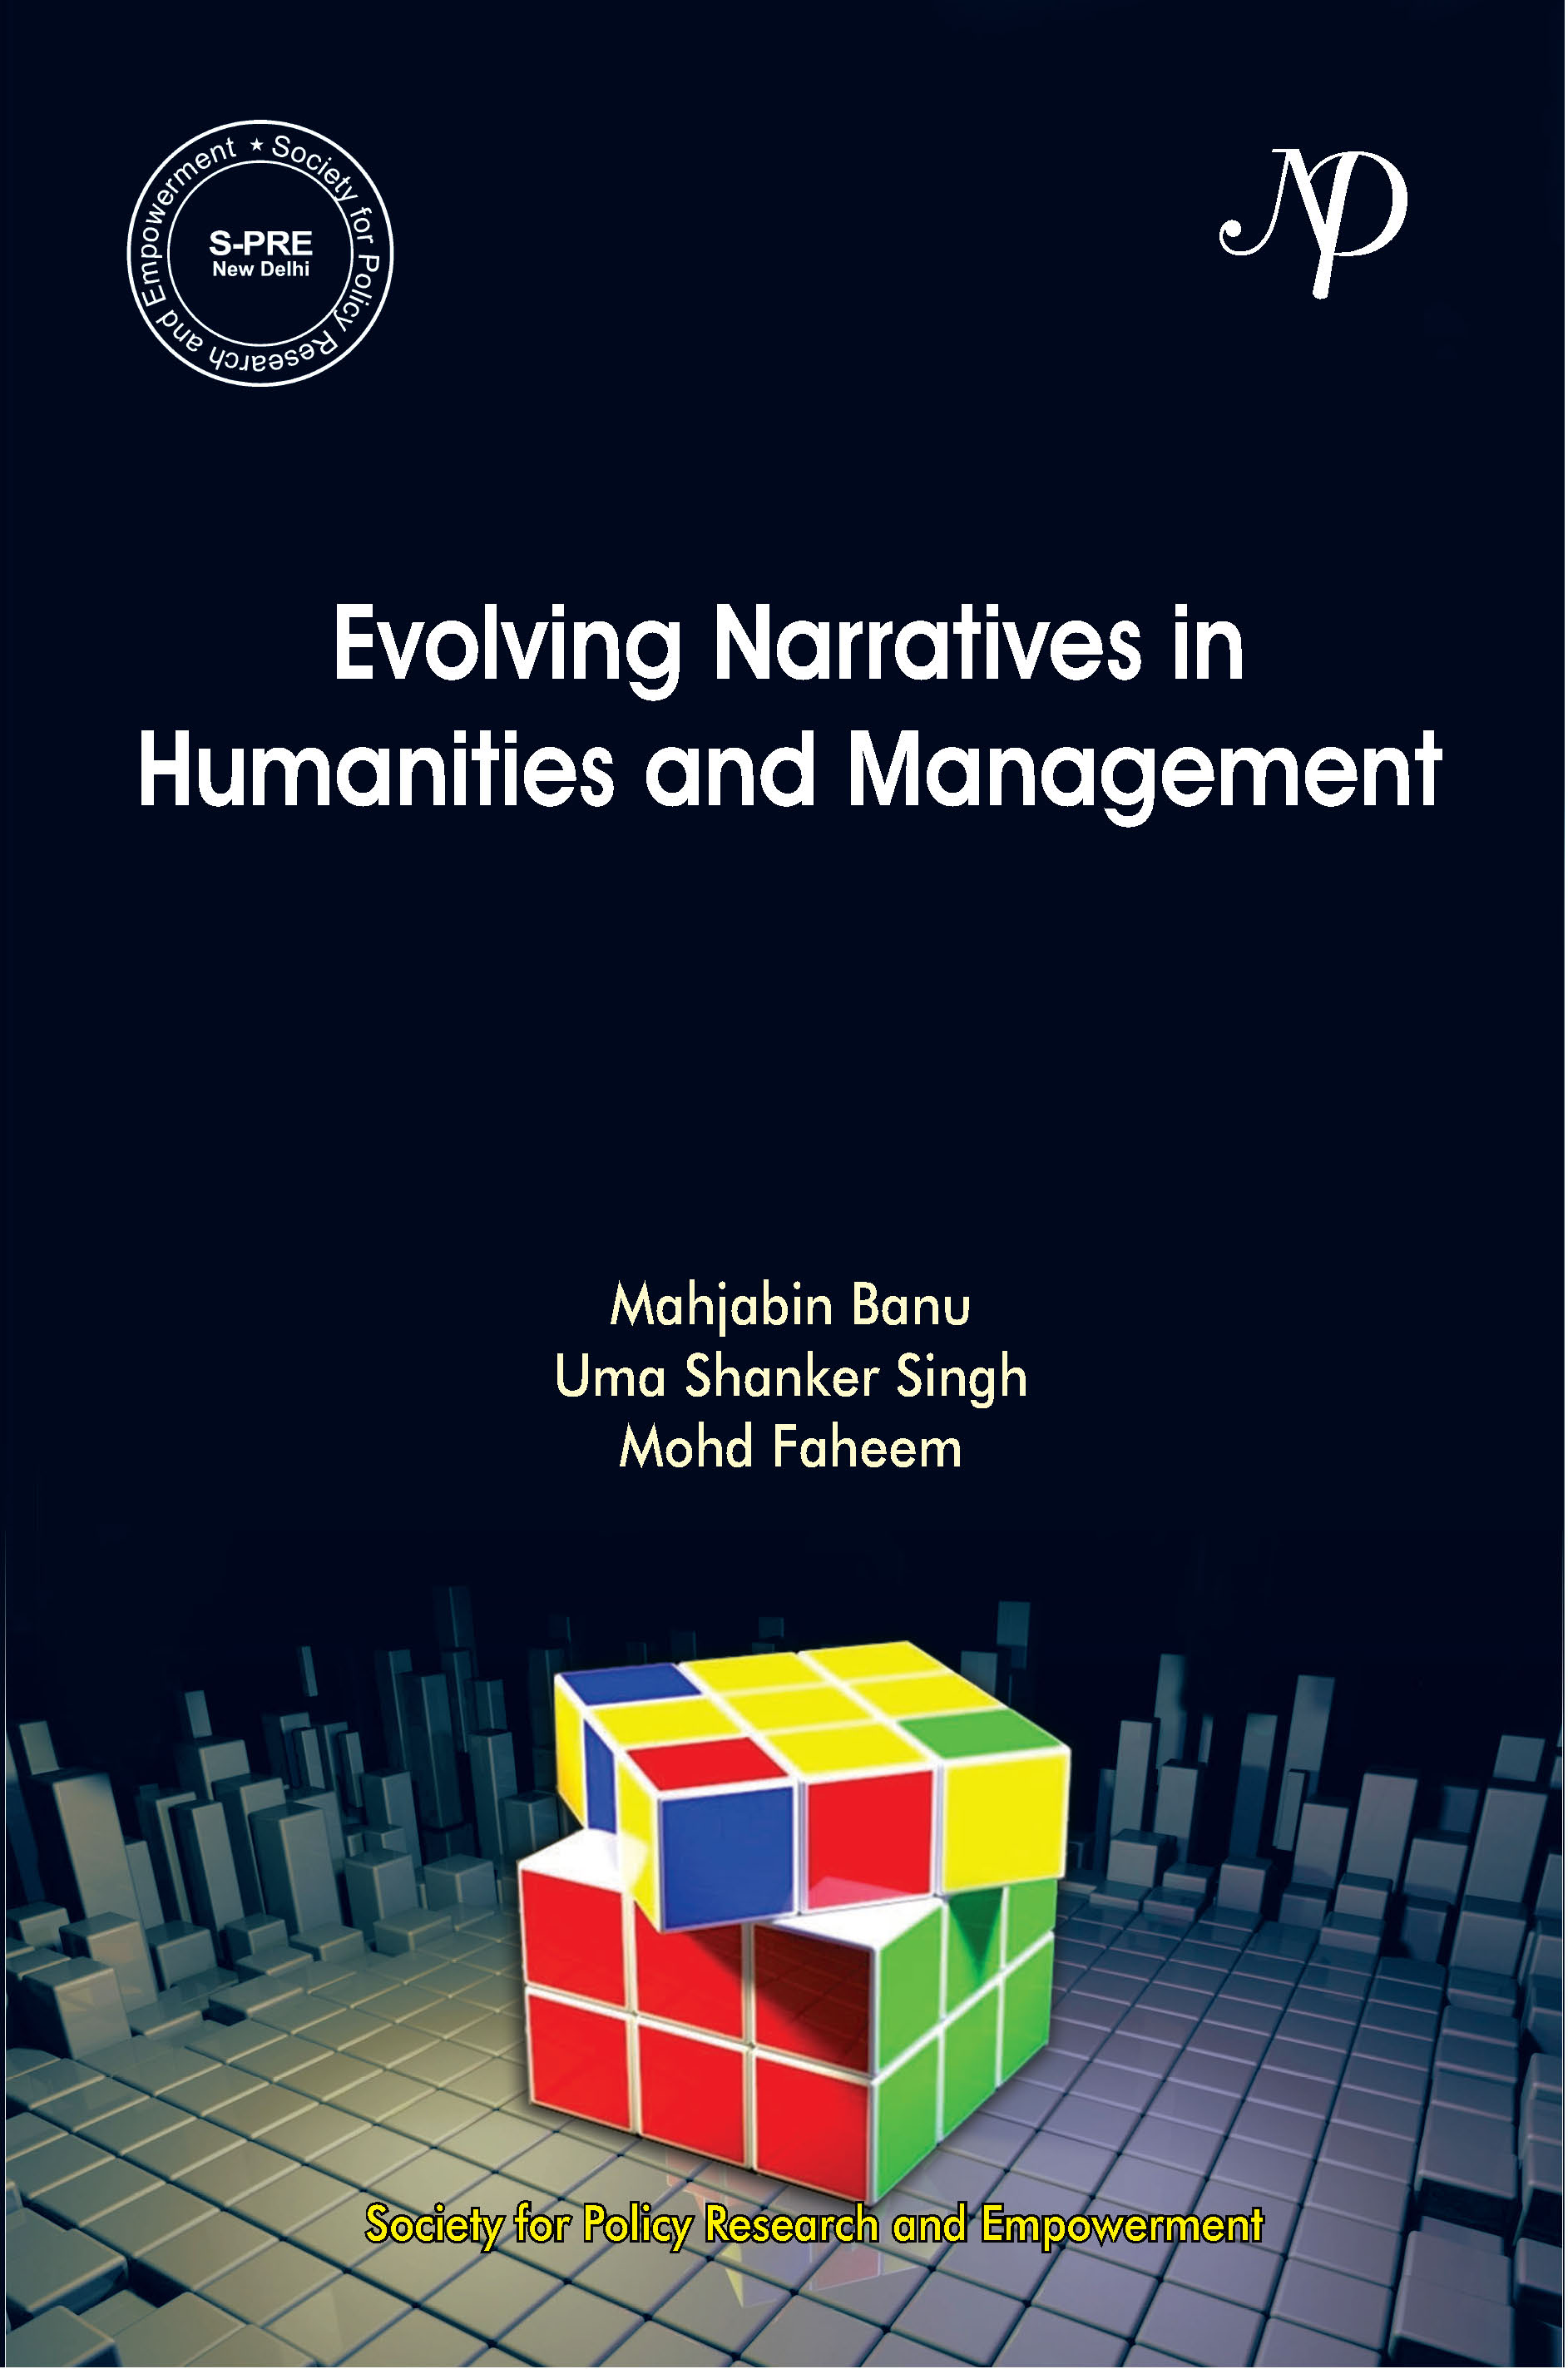 Evolving Narratives in Humanities, Management and Sustainable development Cover 5 Feb 2019.jpg